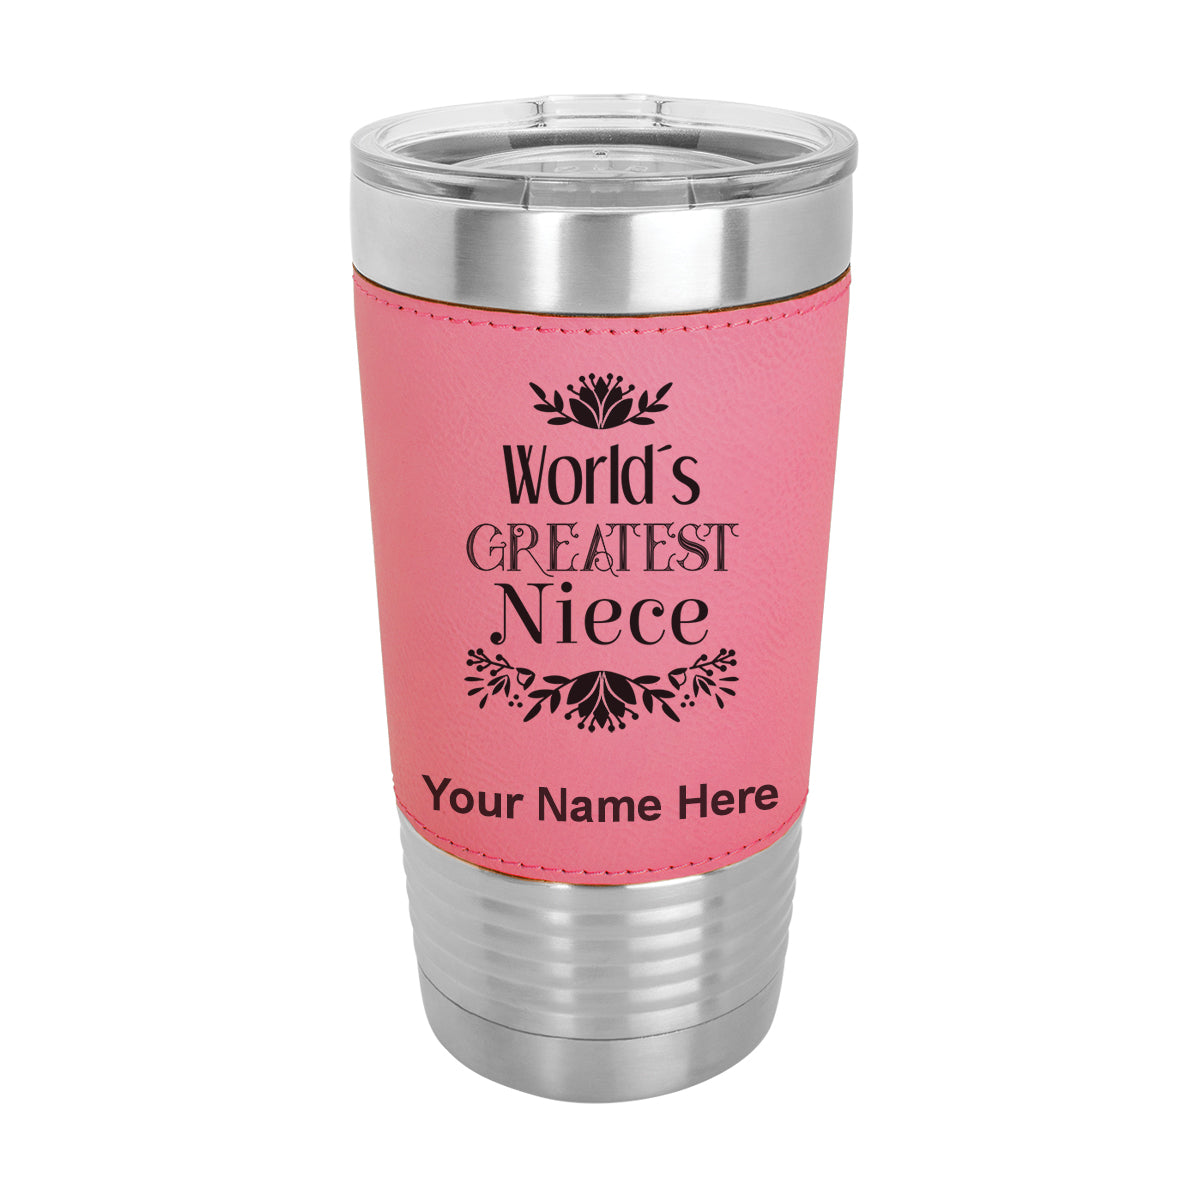 20oz Faux Leather Tumbler Mug, World's Greatest Niece, Personalized Engraving Included